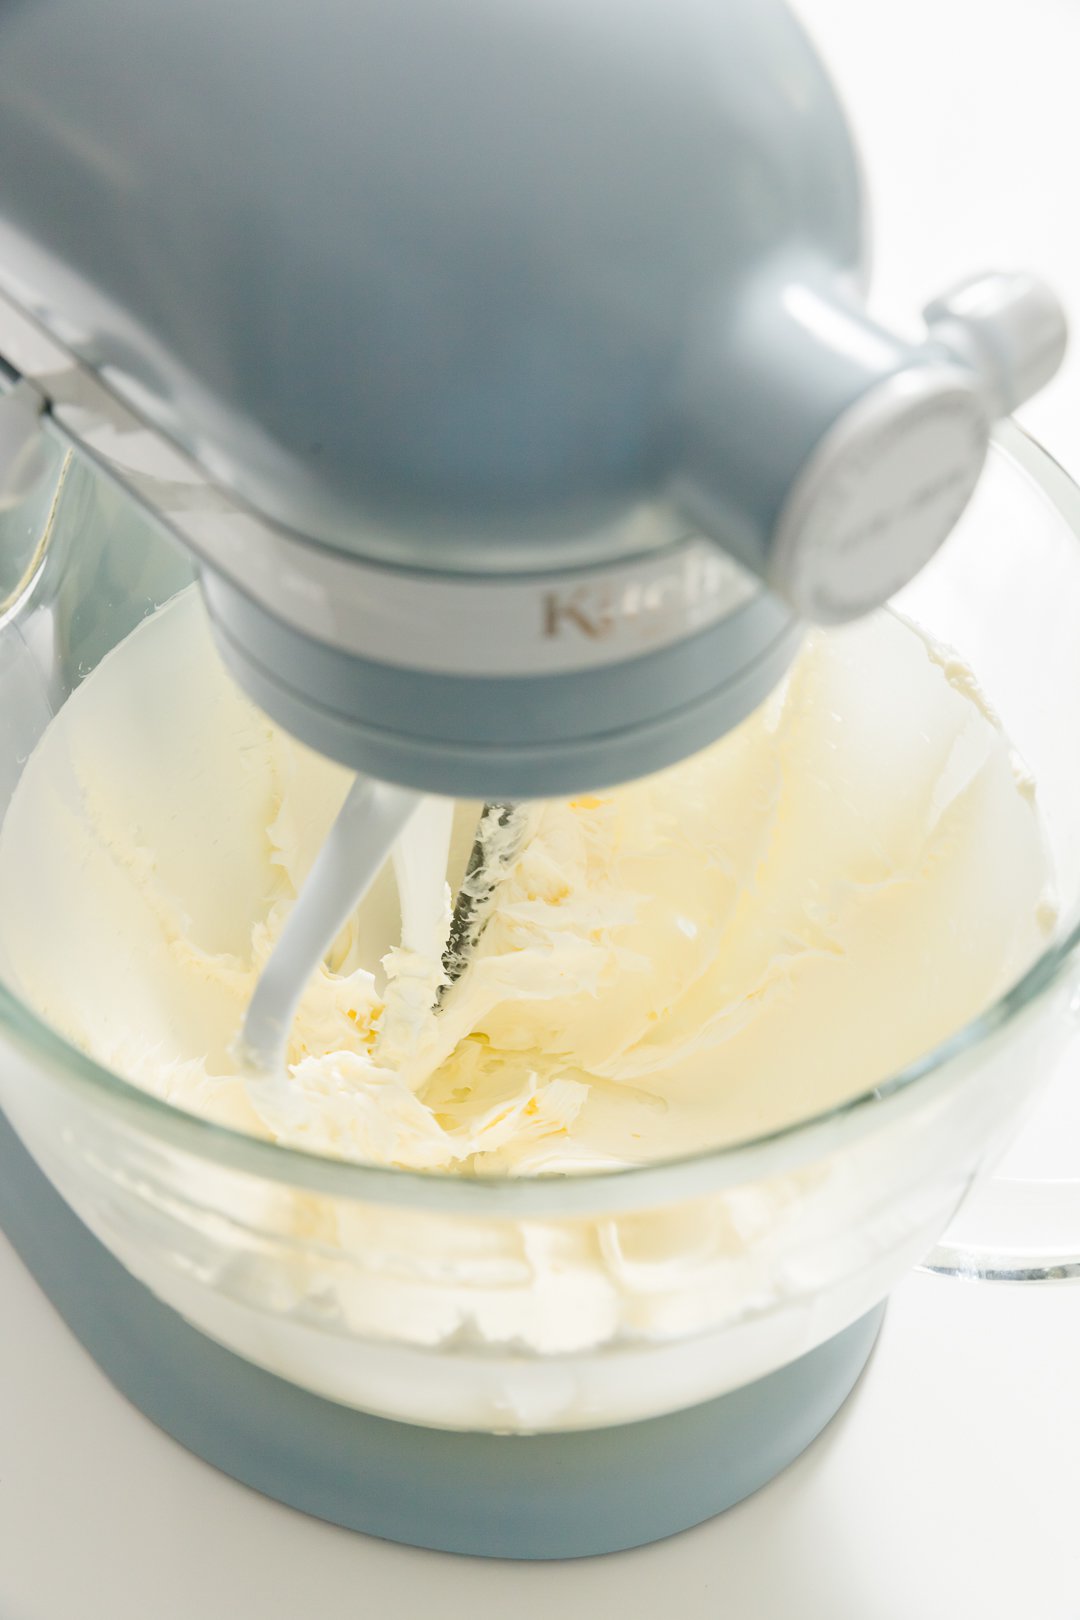 Beating butter in a KitchenAid mixer